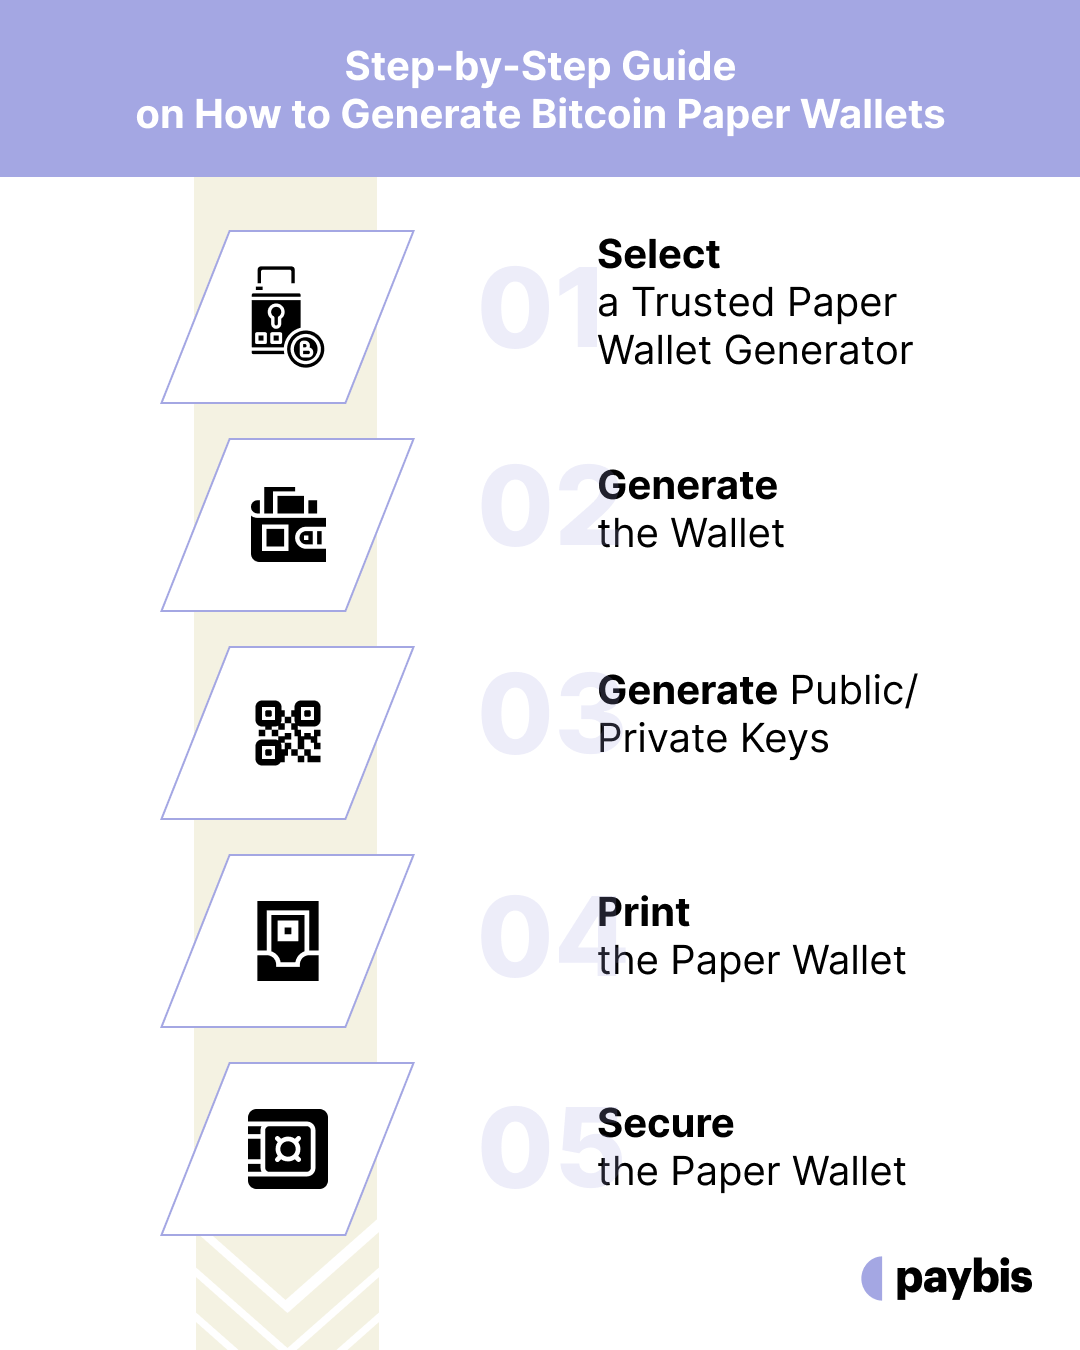 Step-by-Step Guide on How to Generate Bitcoin Paper Wallets